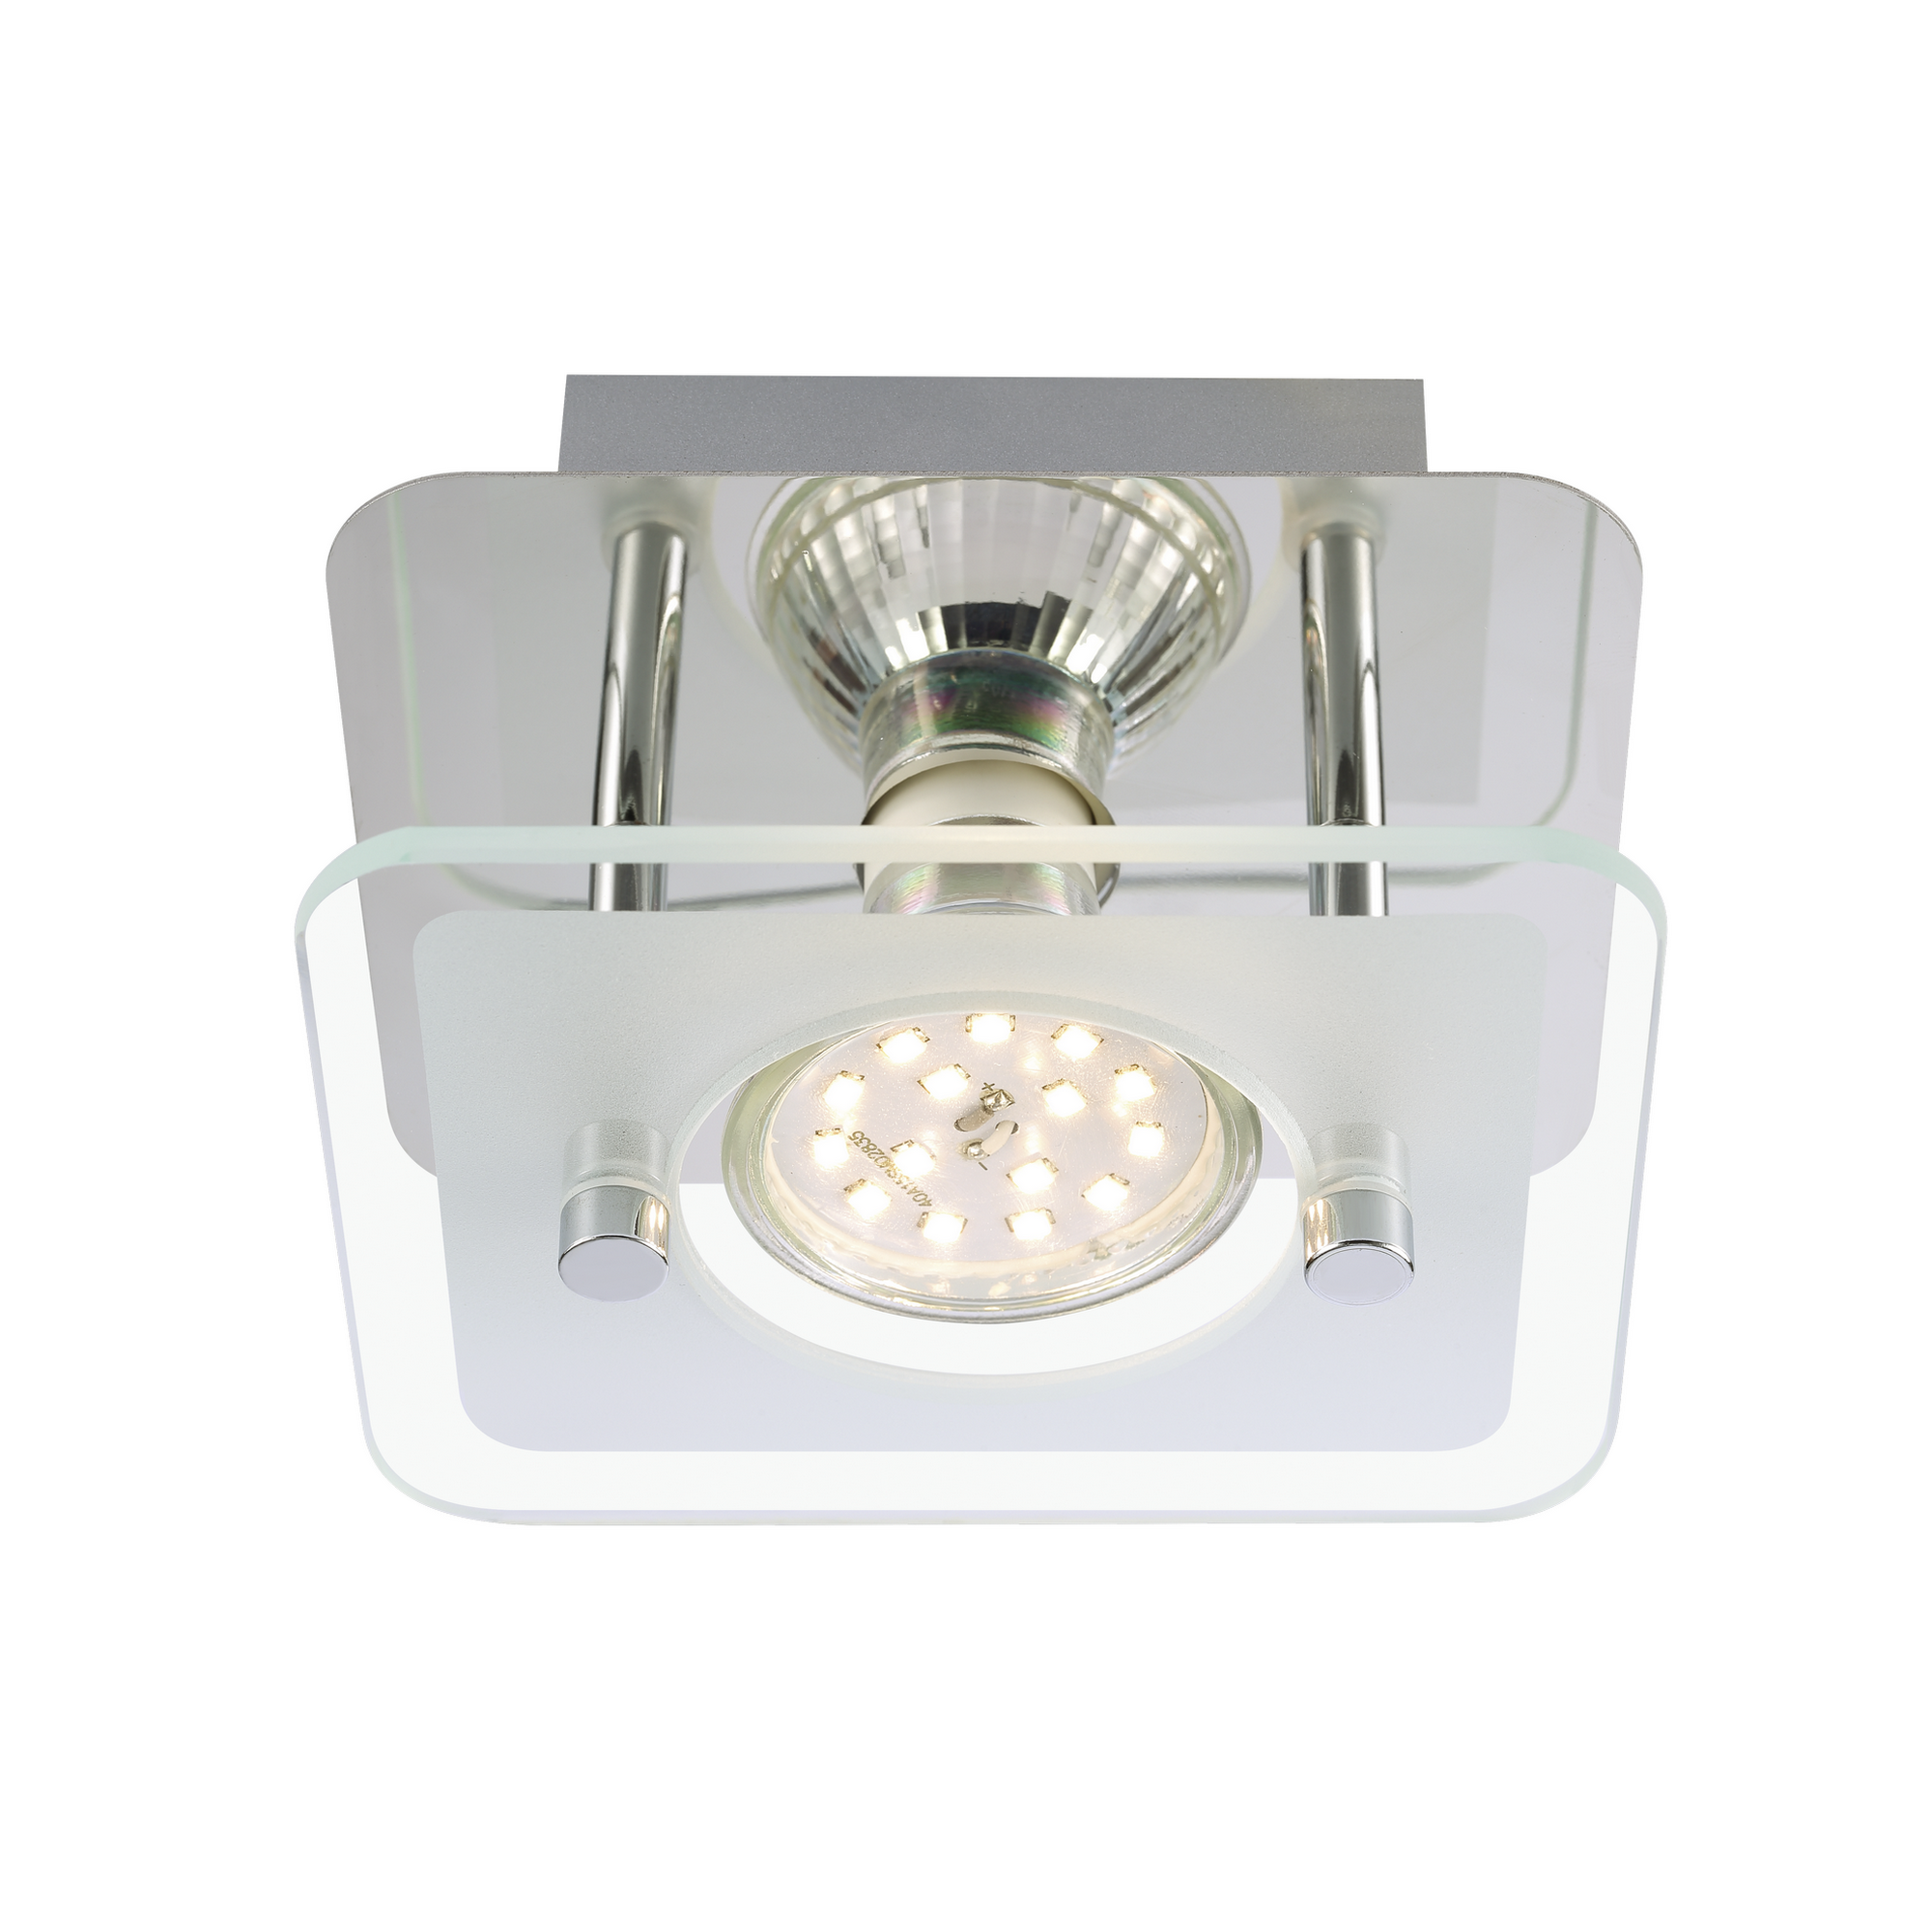 LED-Strahler 'Cosima' 1-flammig 350 lm + product picture